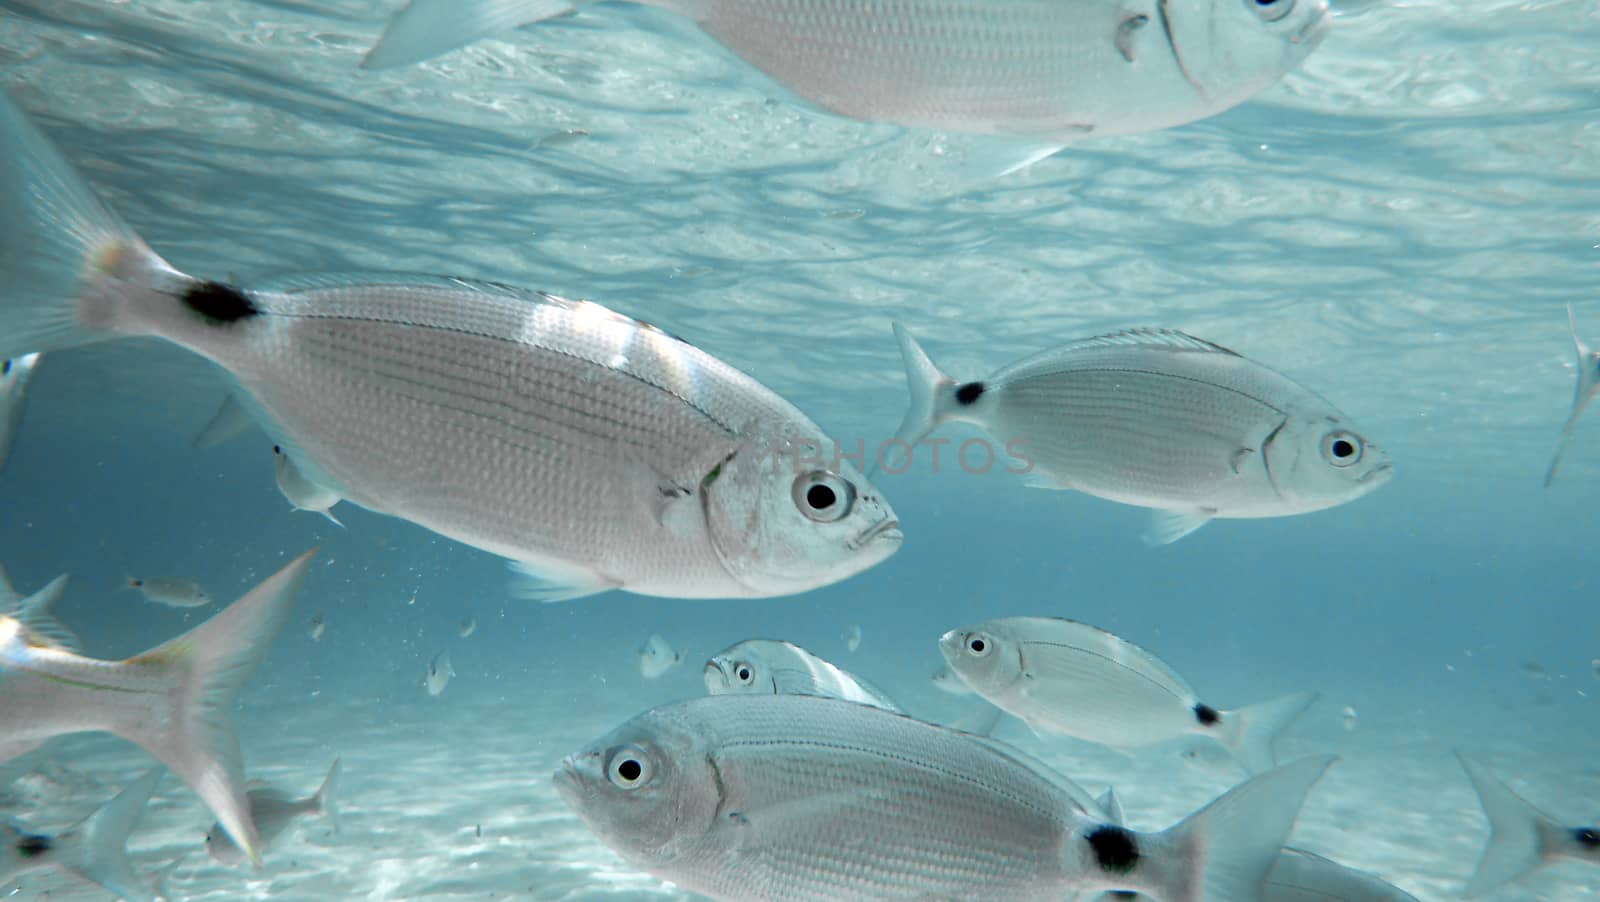 Saddled seabream (Oblada melanura) herd of fish seen from underwater in the crystal blue sea with one of them in the foreground that seems to be looking at the camera